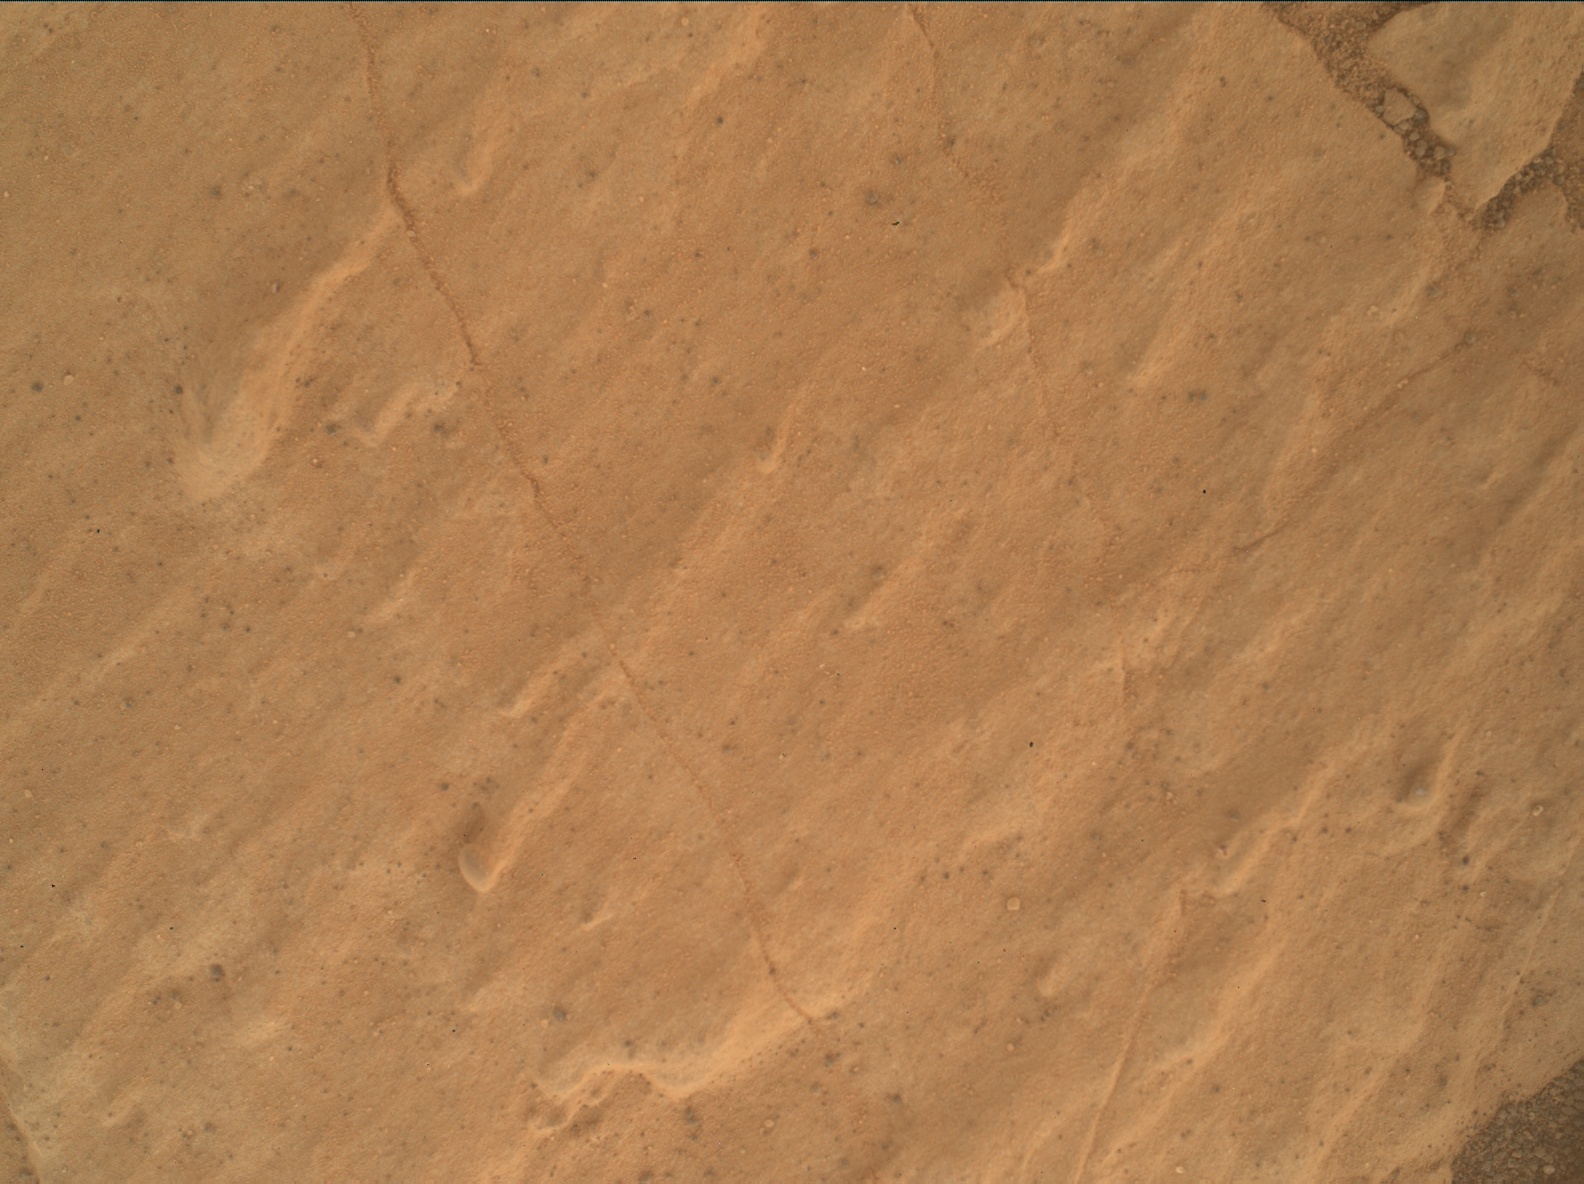 Nasa's Mars rover Curiosity acquired this image using its Mars Hand Lens Imager (MAHLI) on Sol 3074